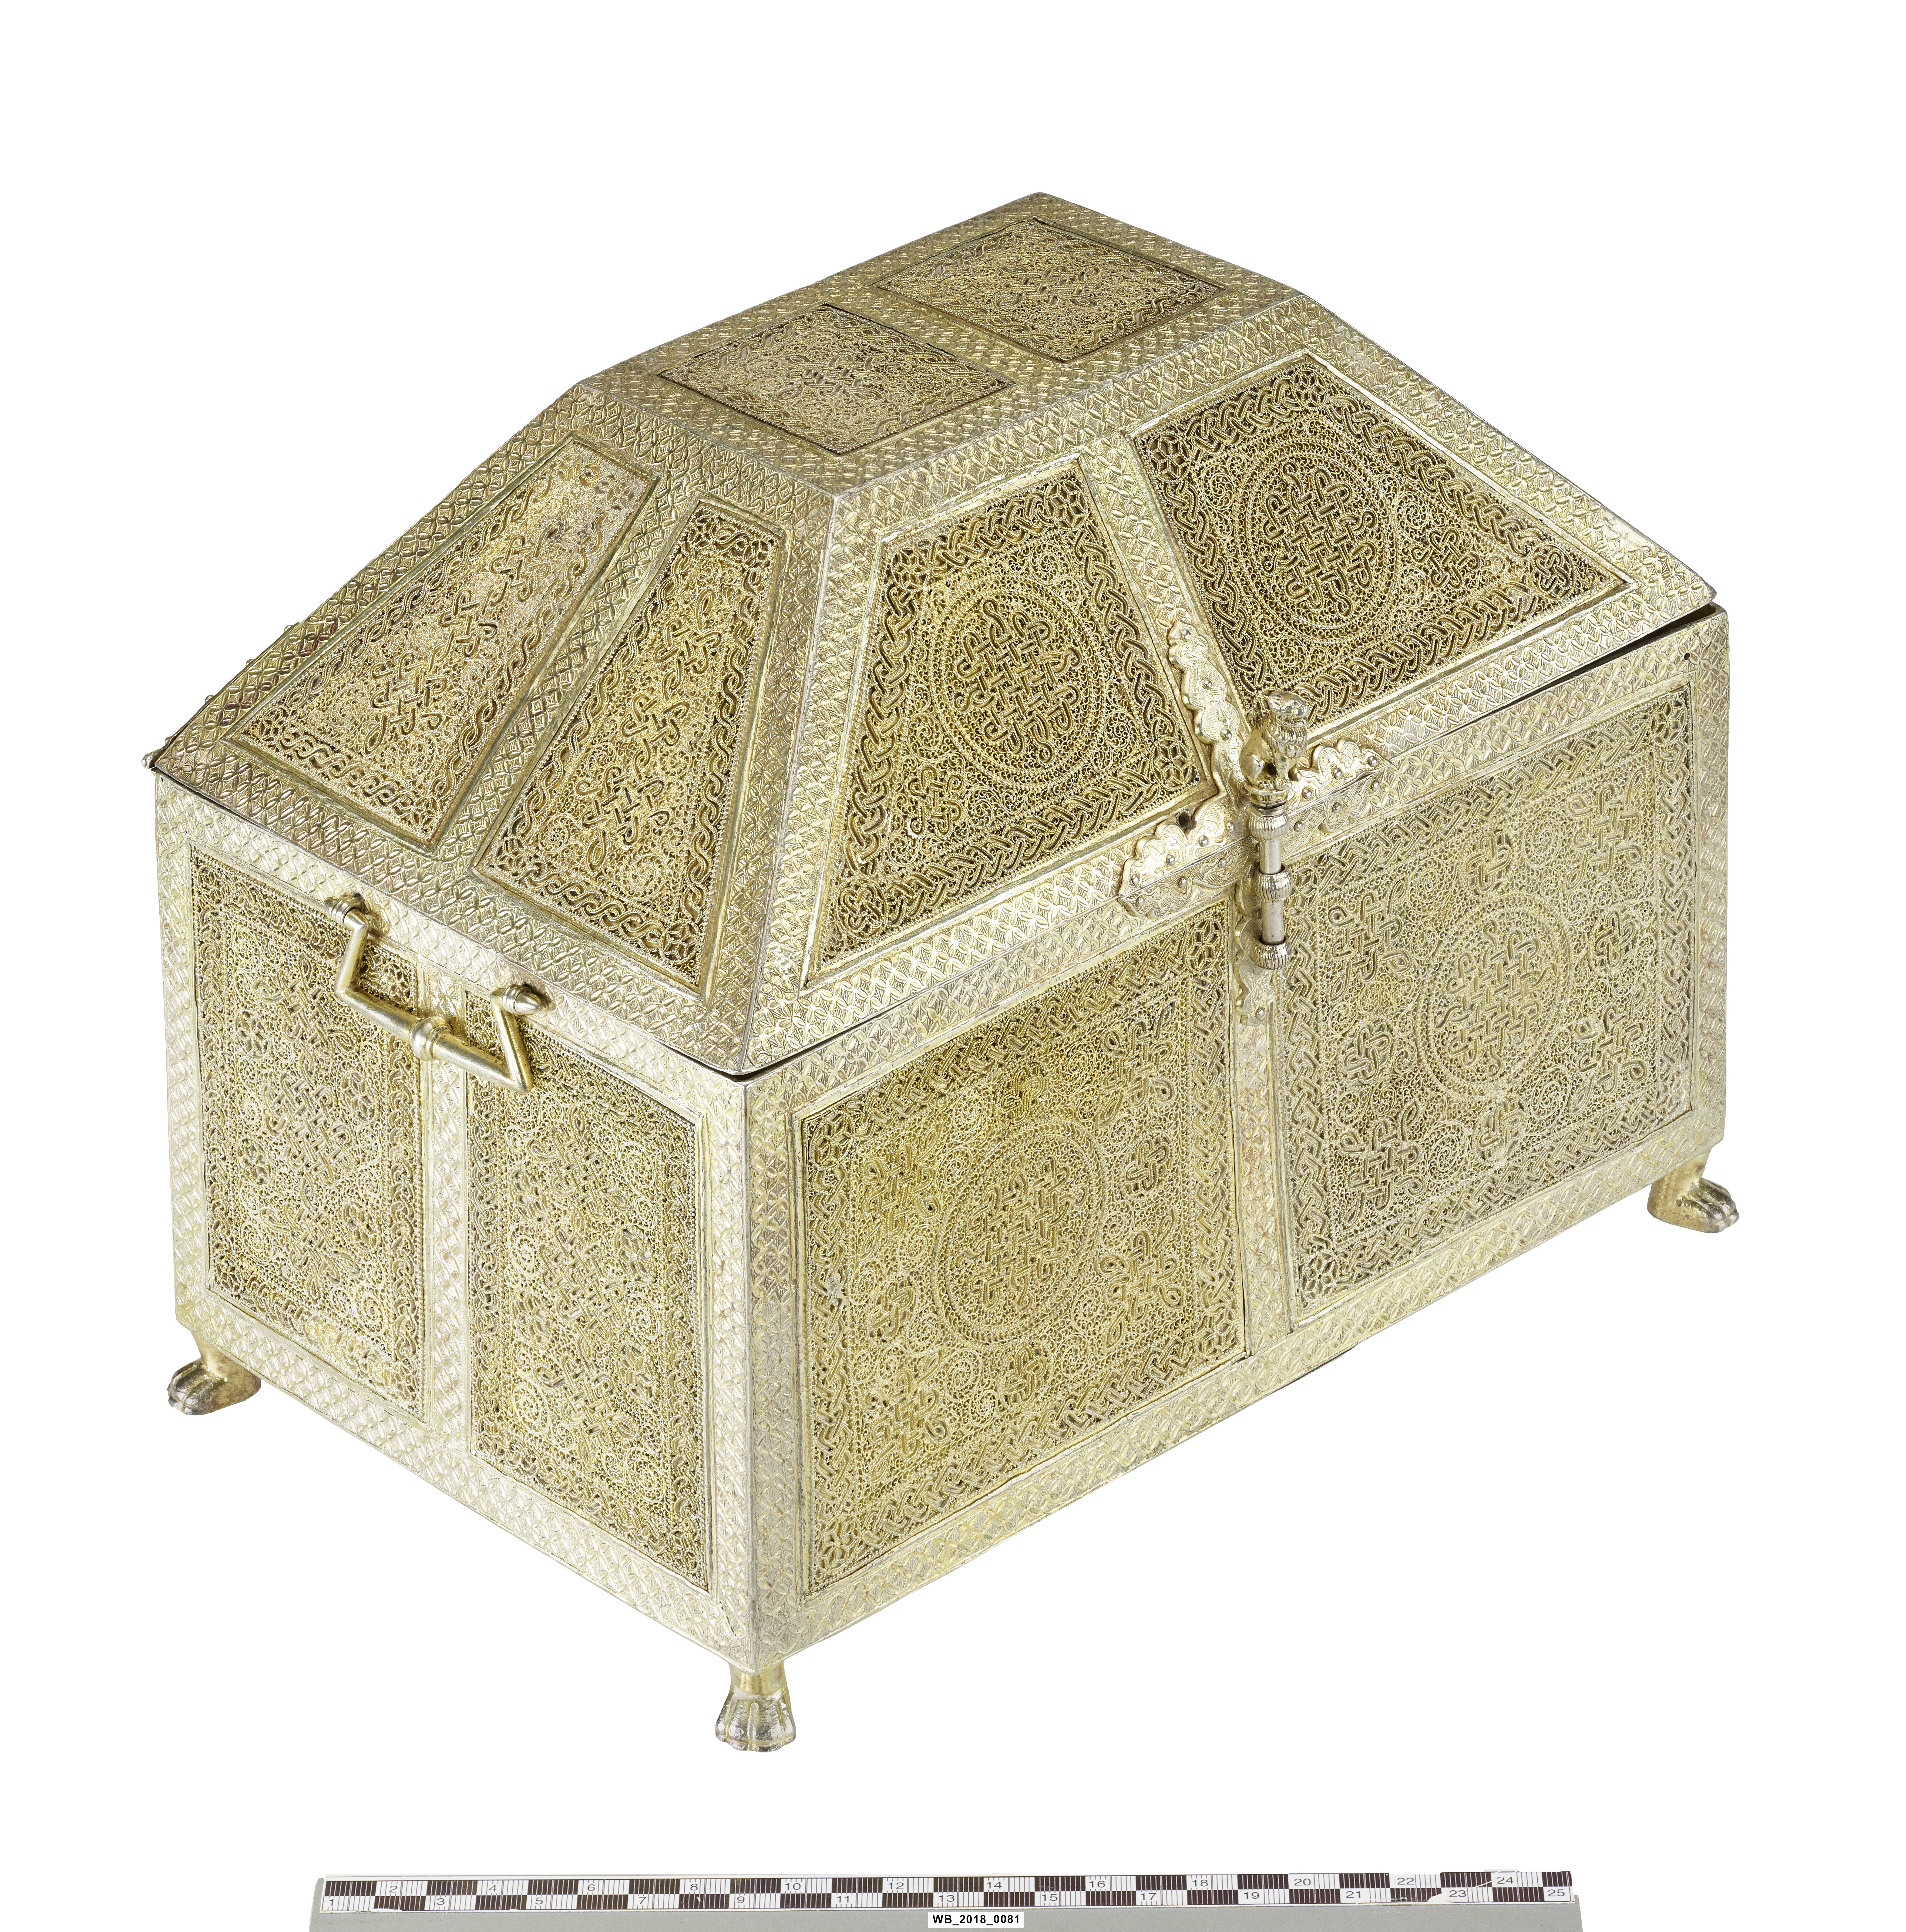 Silver-gilt casket in the Cathedral Treasure of Trier, Germany, Sicily, 12th to early 13th century, full view.